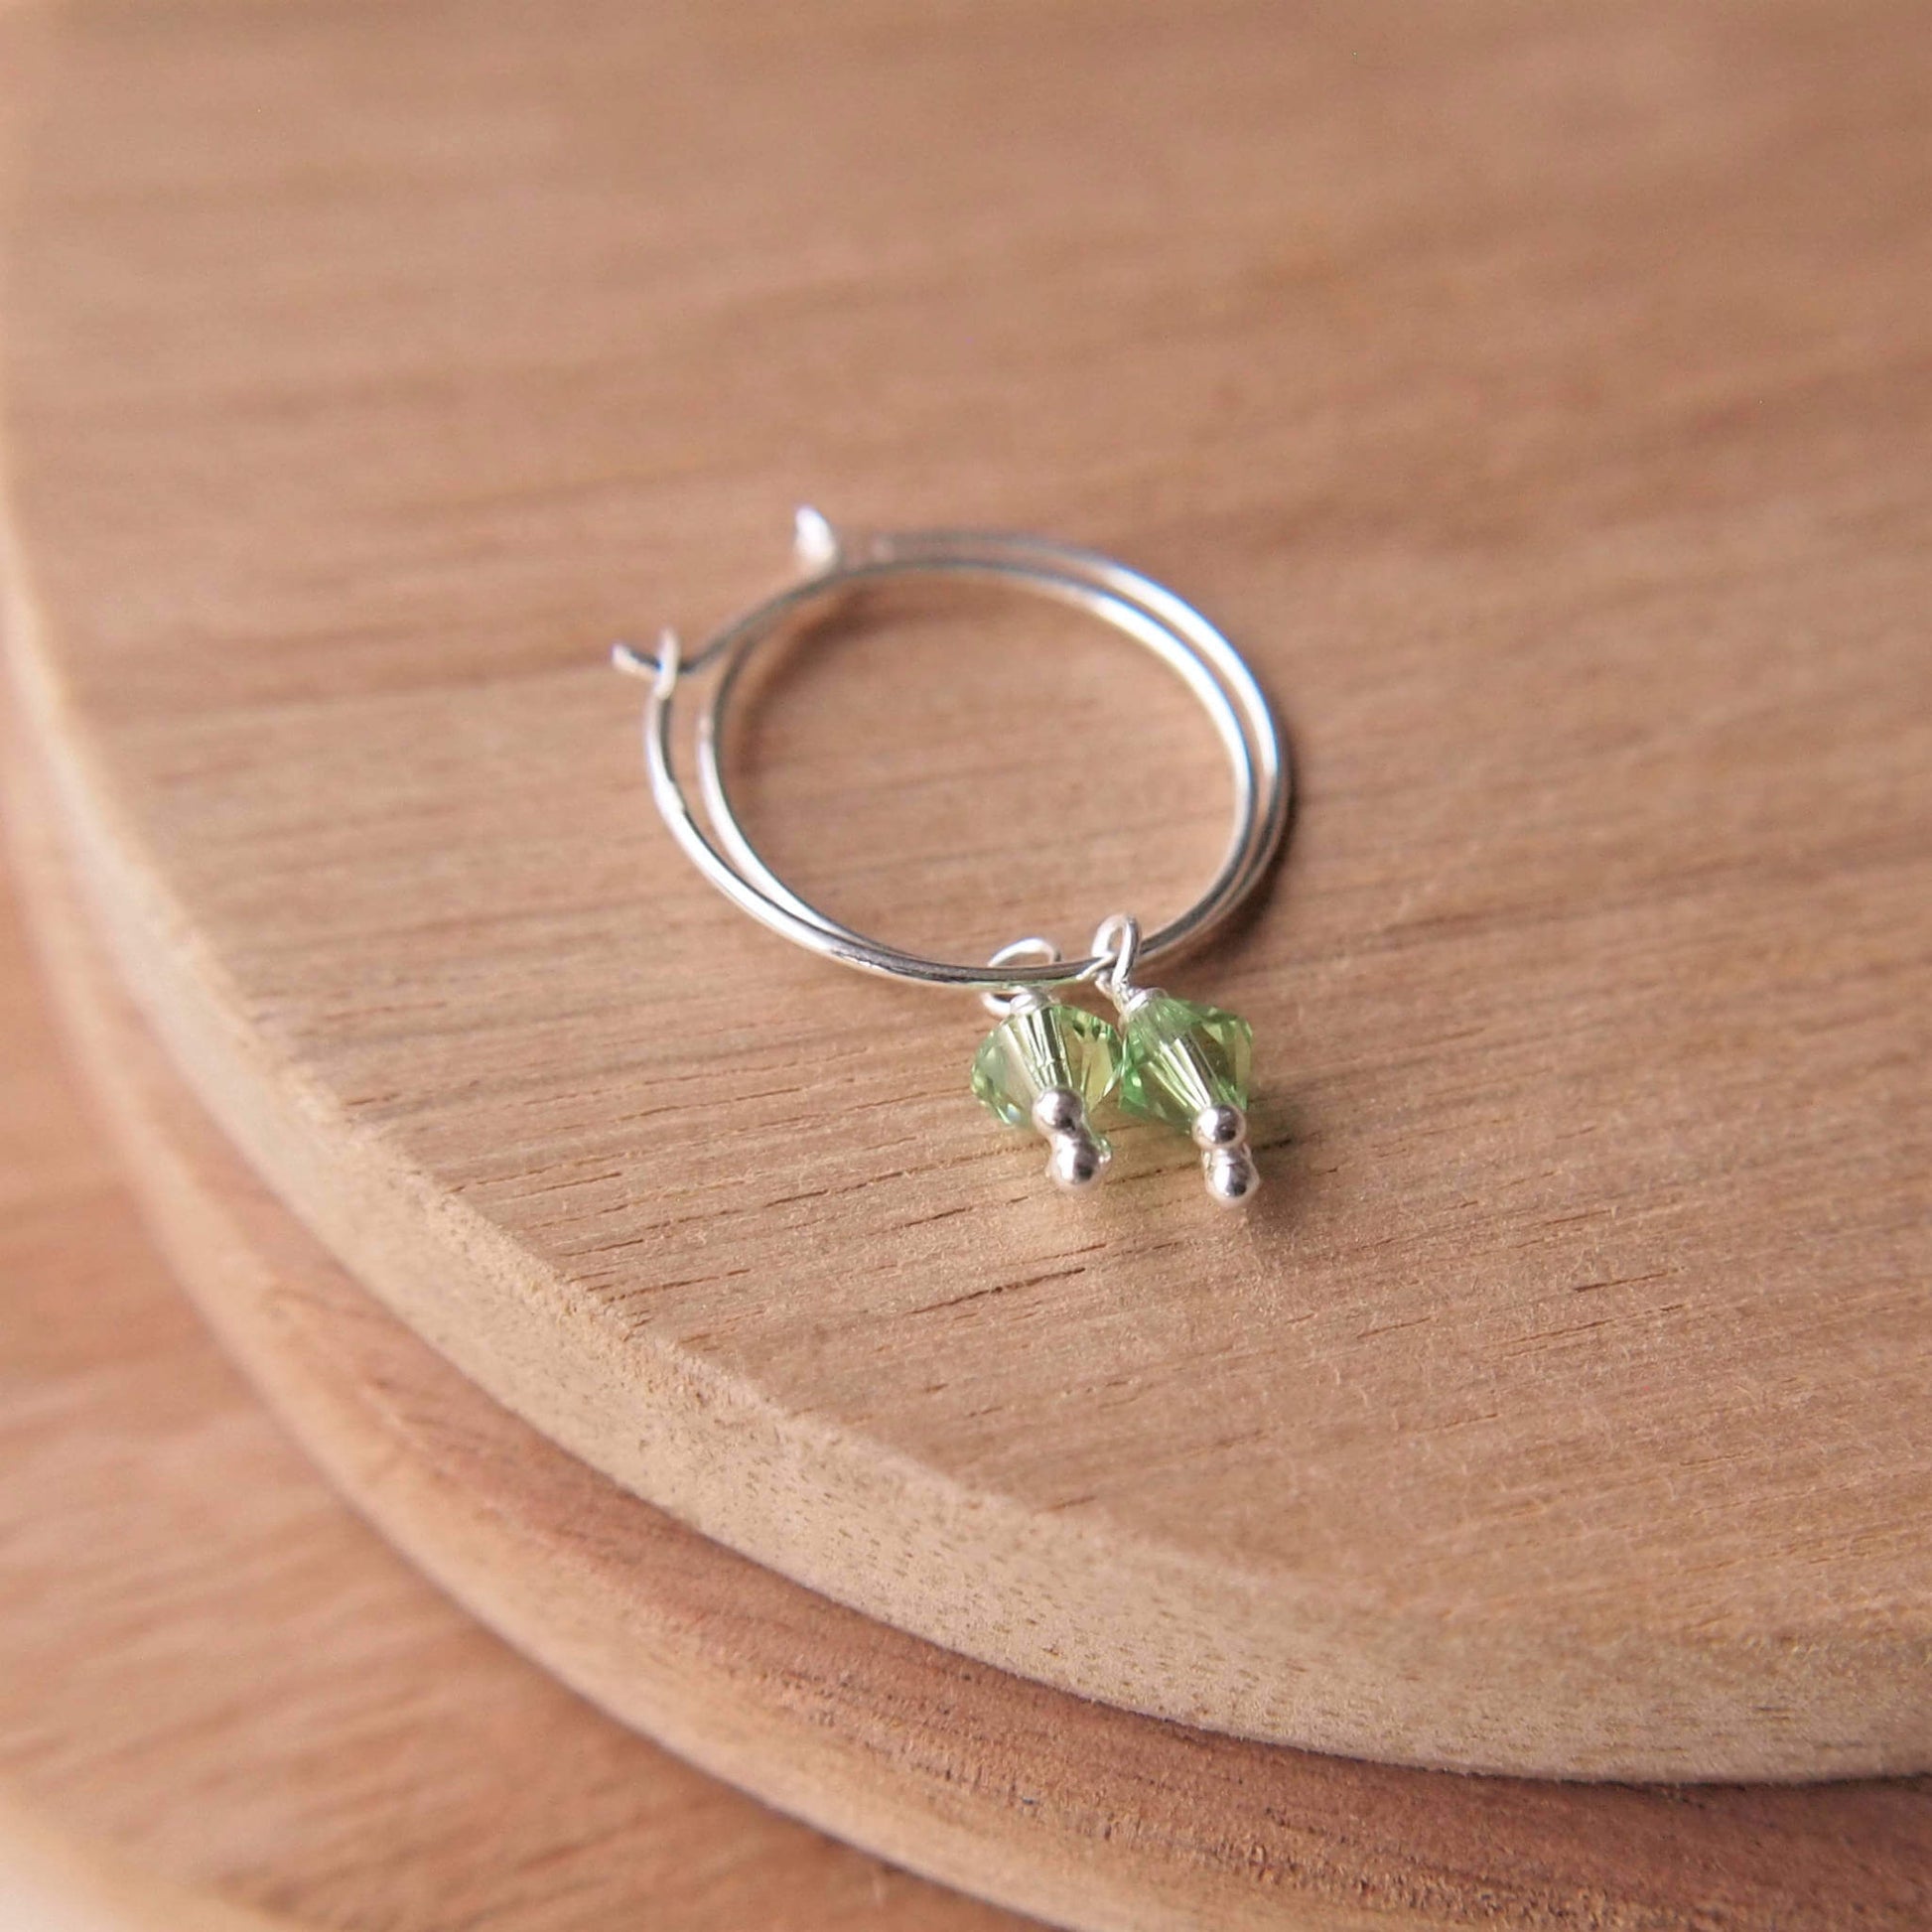 small simple hoops with birthstone crystal in green (August birthstone peridot)